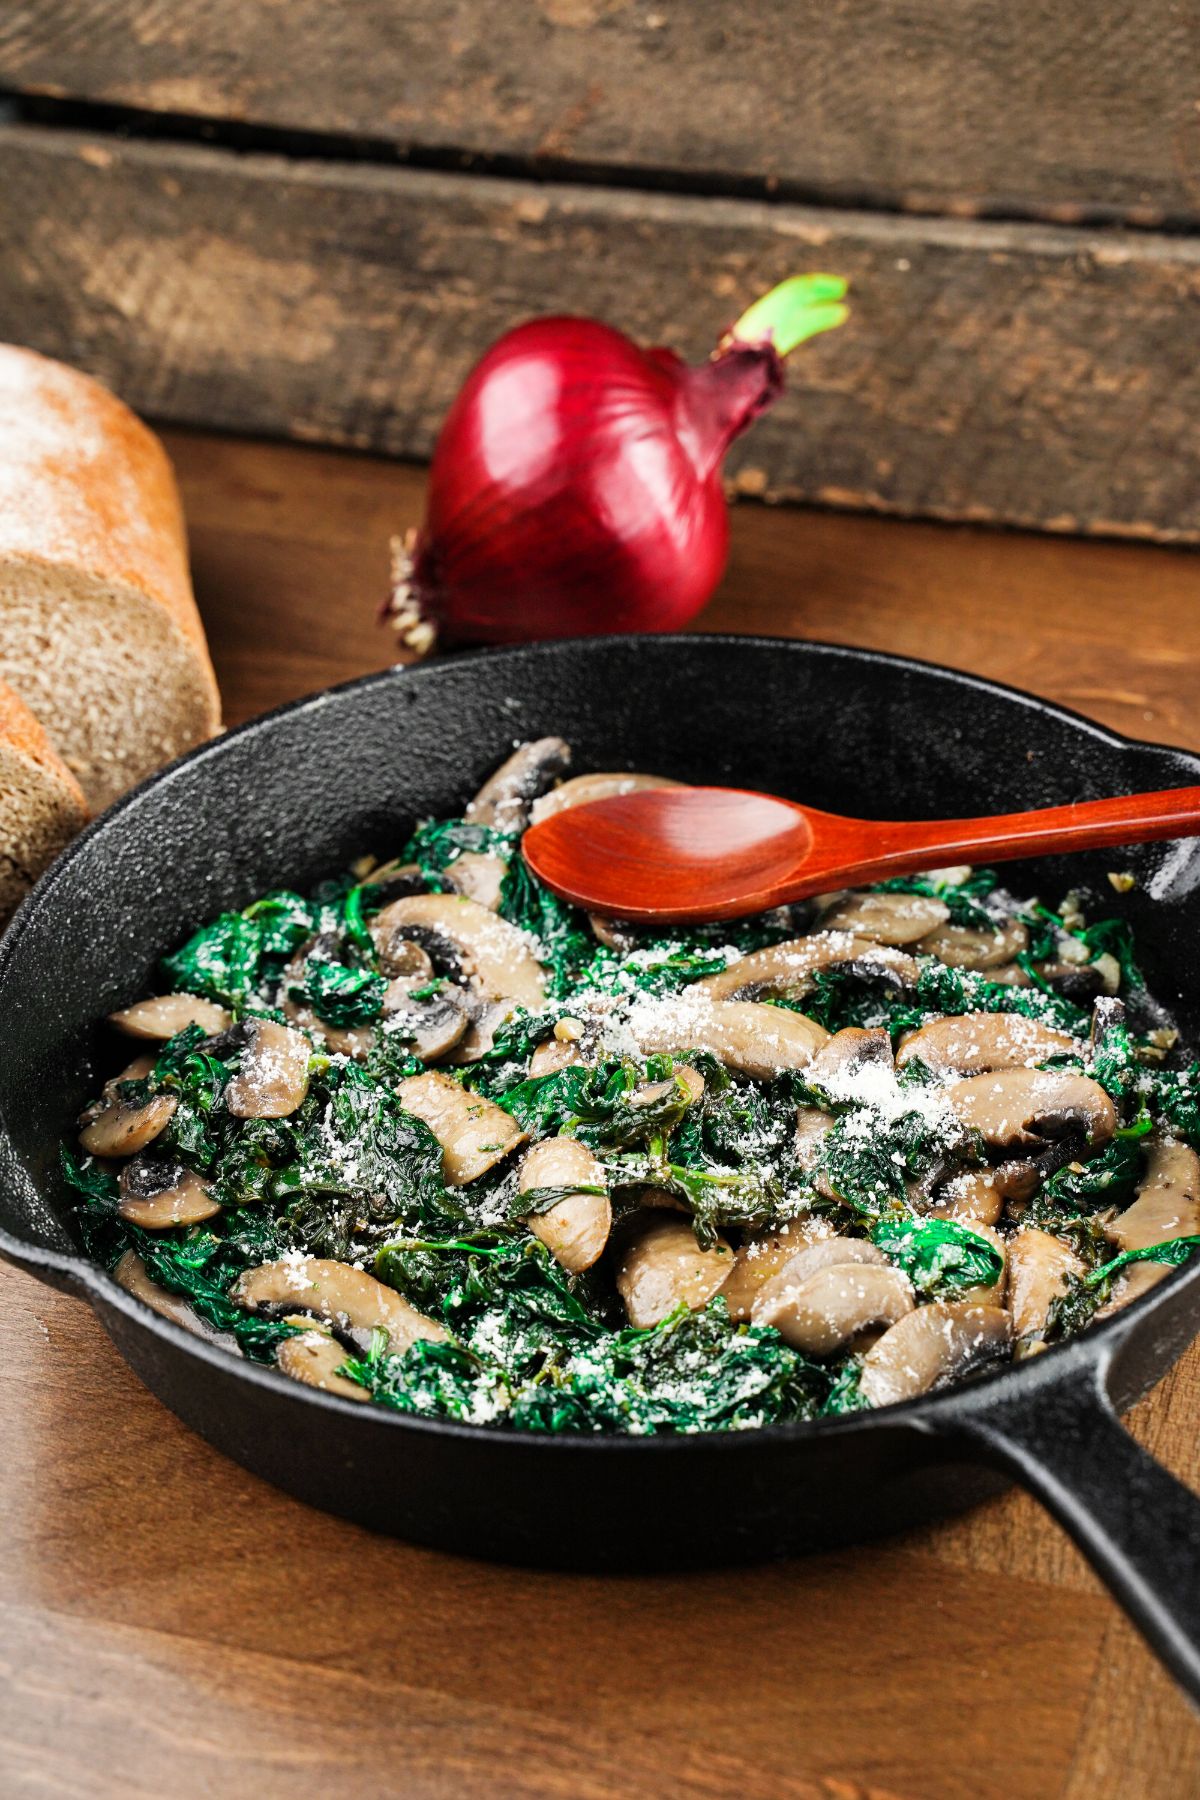 cast iron skillet of mushrooms and spinach on wood table with red wooden spoon on corner of pan